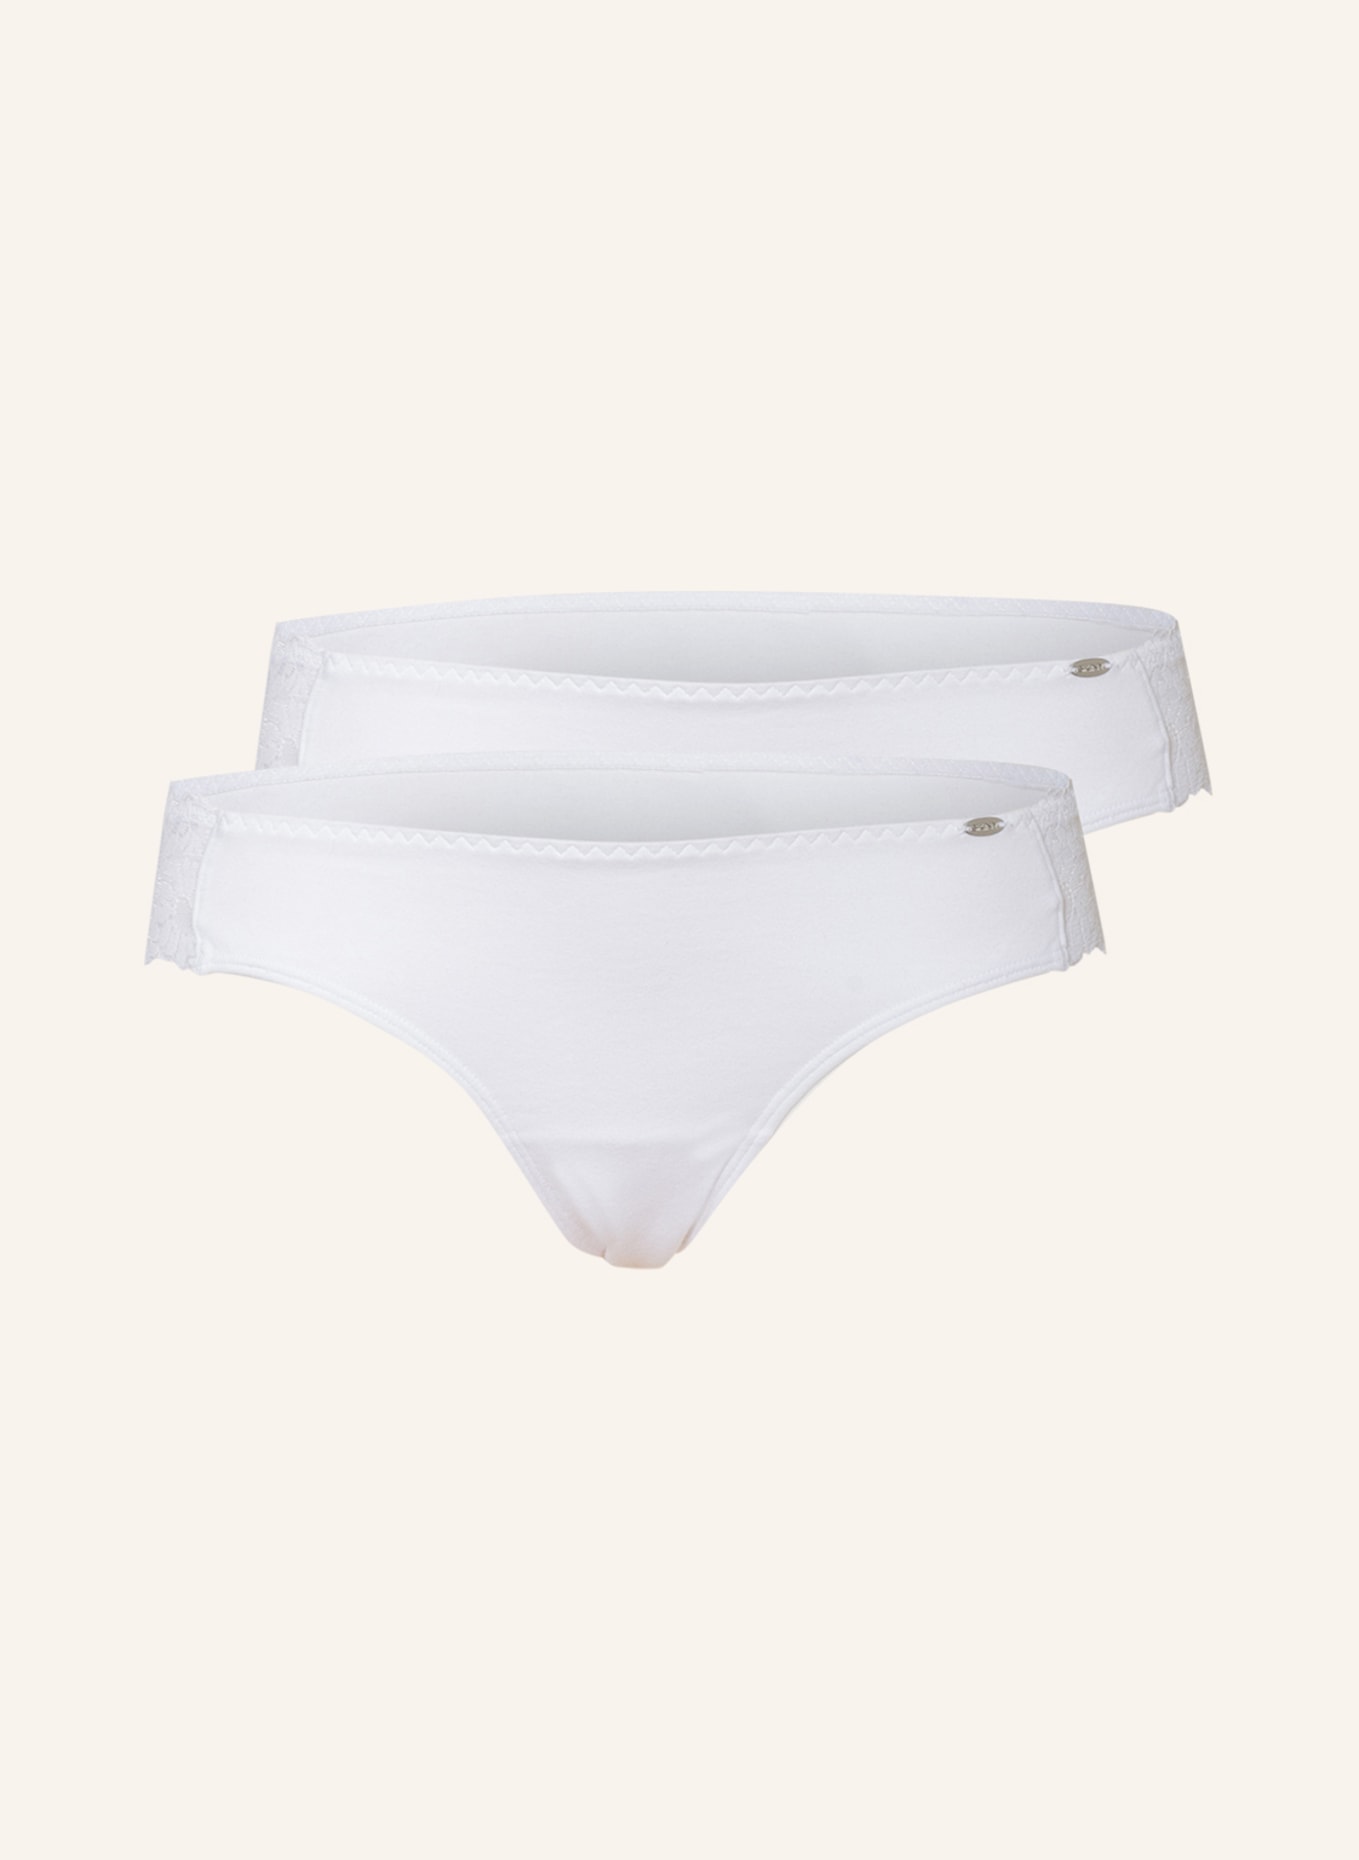 Skiny 2 pack of briefs COTTON LACE, Color: WHITE (Image 1)